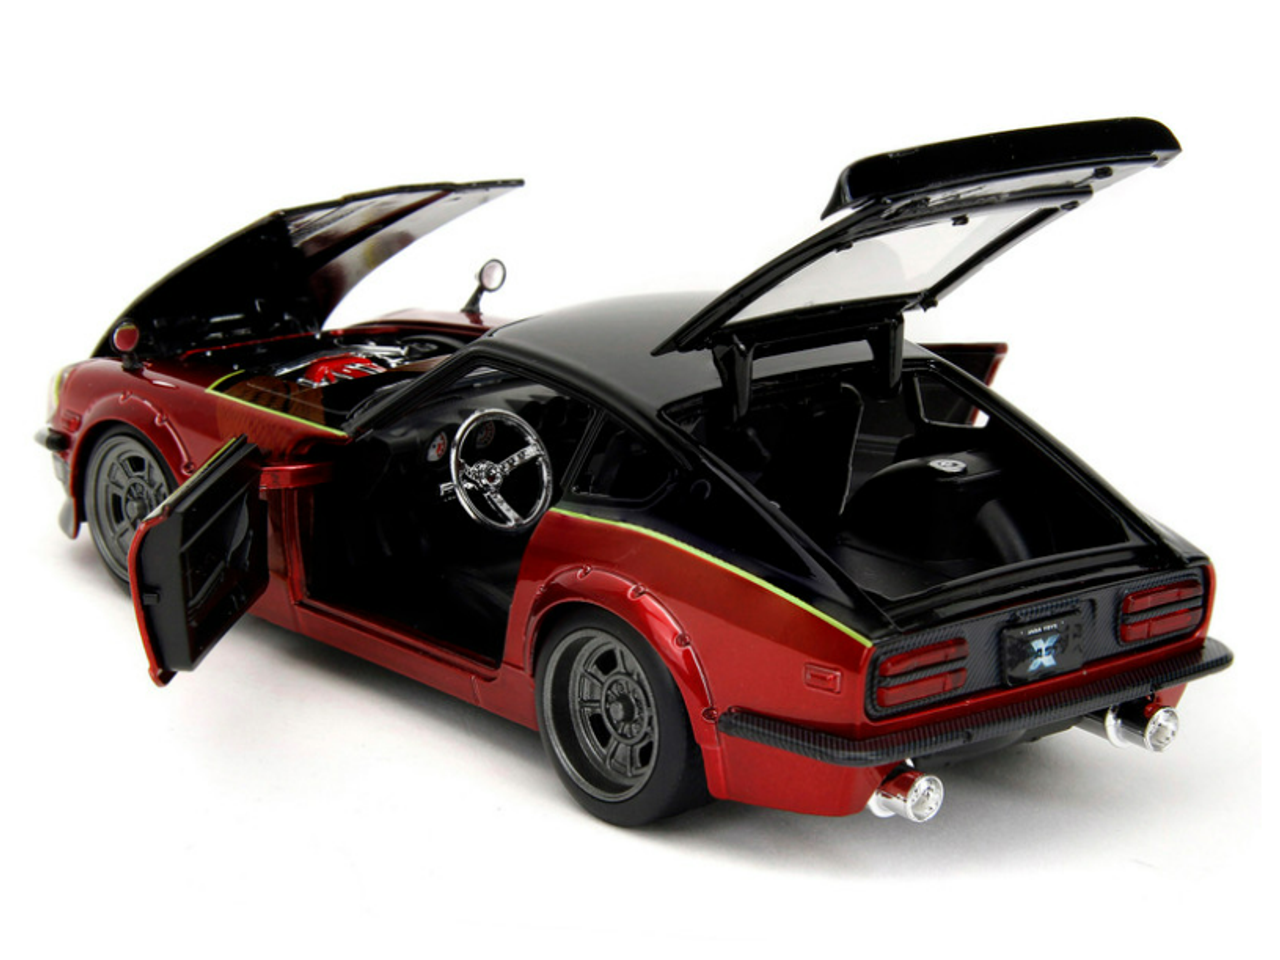 1972 Datsun 240Z Black and Red Metallic with Graphics "Fast X" (2023) Movie "Fast & Furious" Series 1/24 Diecast Model Car by Jada